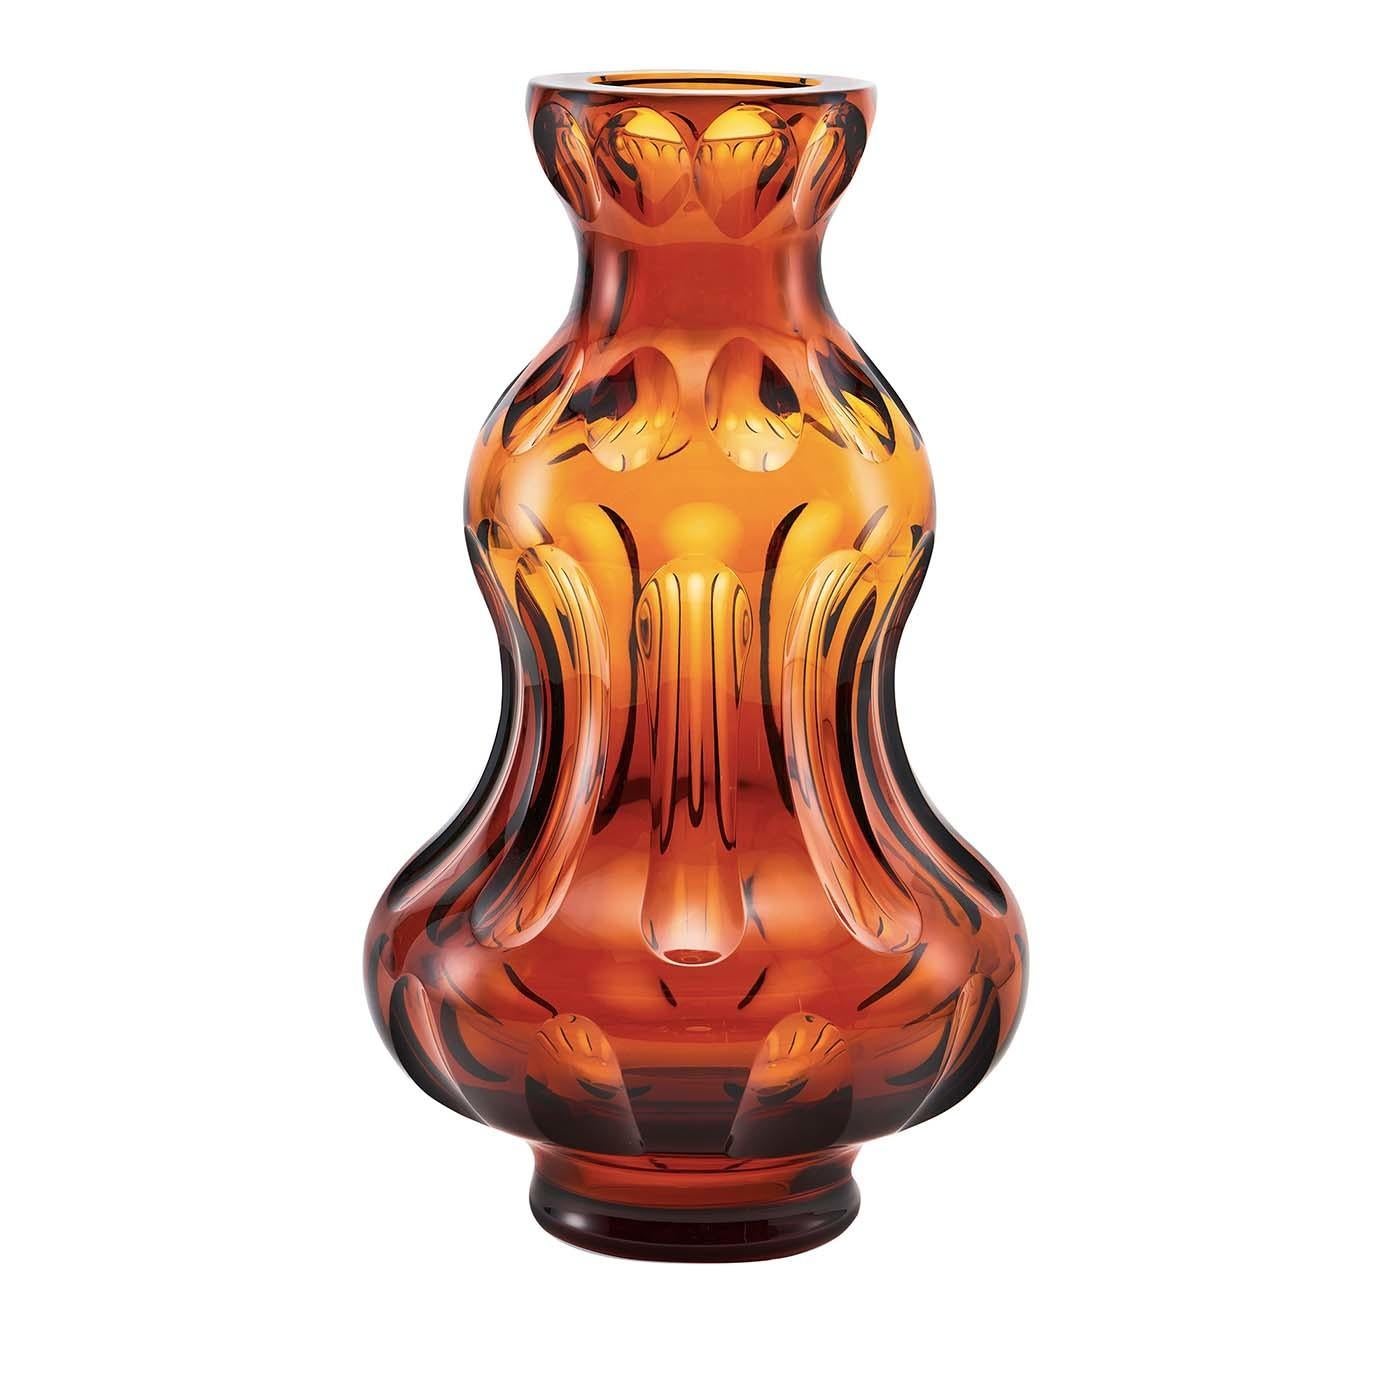 An interpretation of the most powerful force in the world, this crystal vase is named Love and will be a stunning addition to a modern or classic interior. Its cognac-colored curves create an elegant and sinuous silhouette that is enriched with a